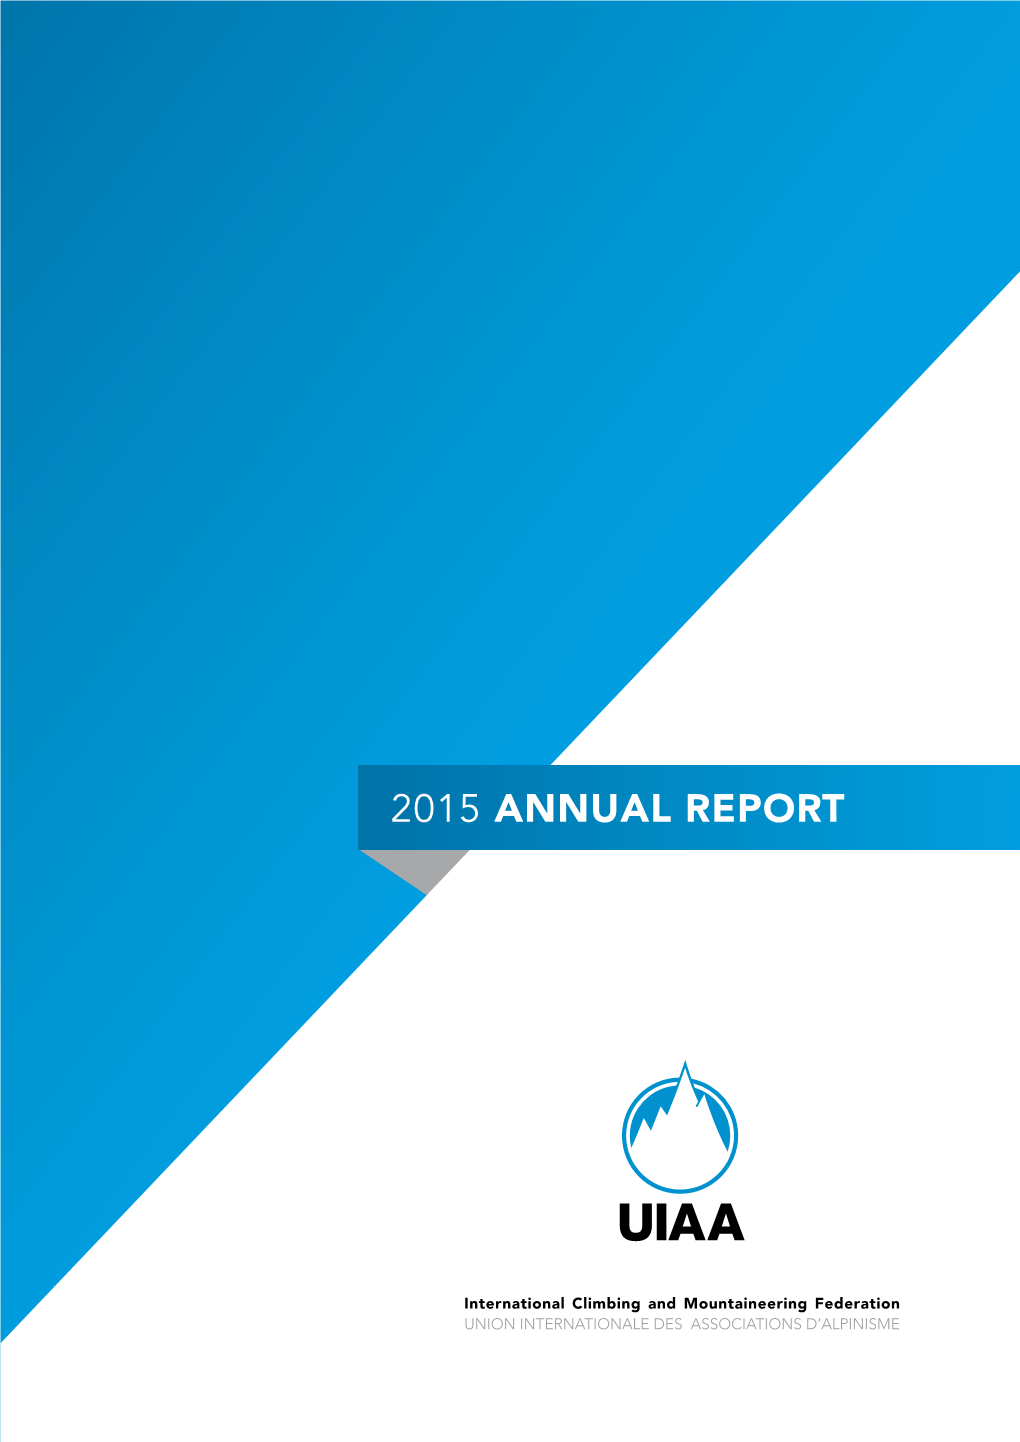 2015 ANNUAL REPORT - 2 - Contents